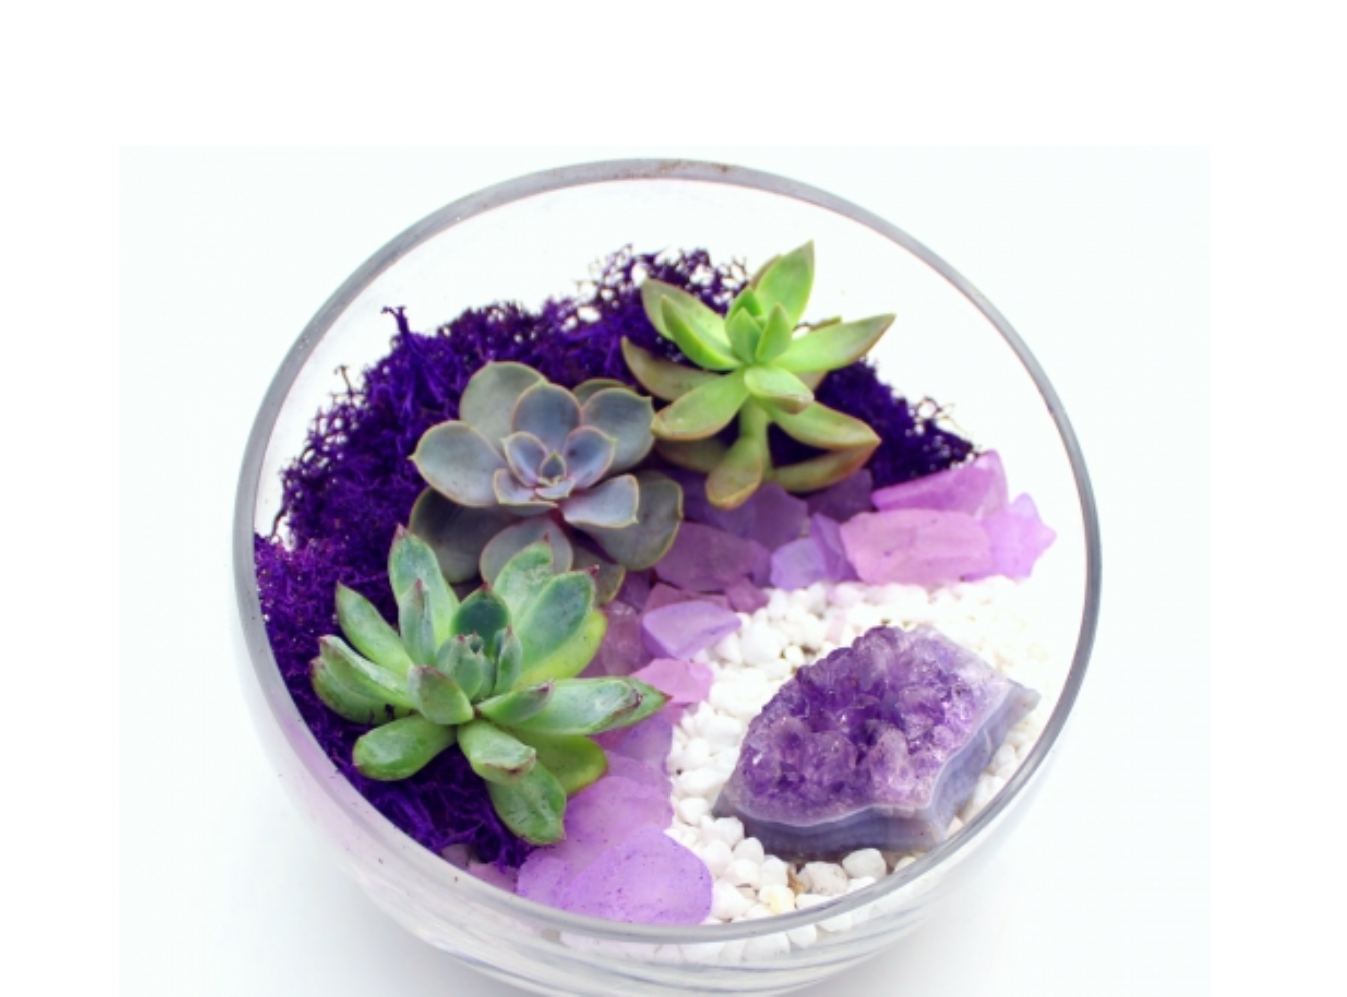 A Succulent Terrarium in Half Cut Bowl with Amethyst Crystal plant nite project by Yaymaker